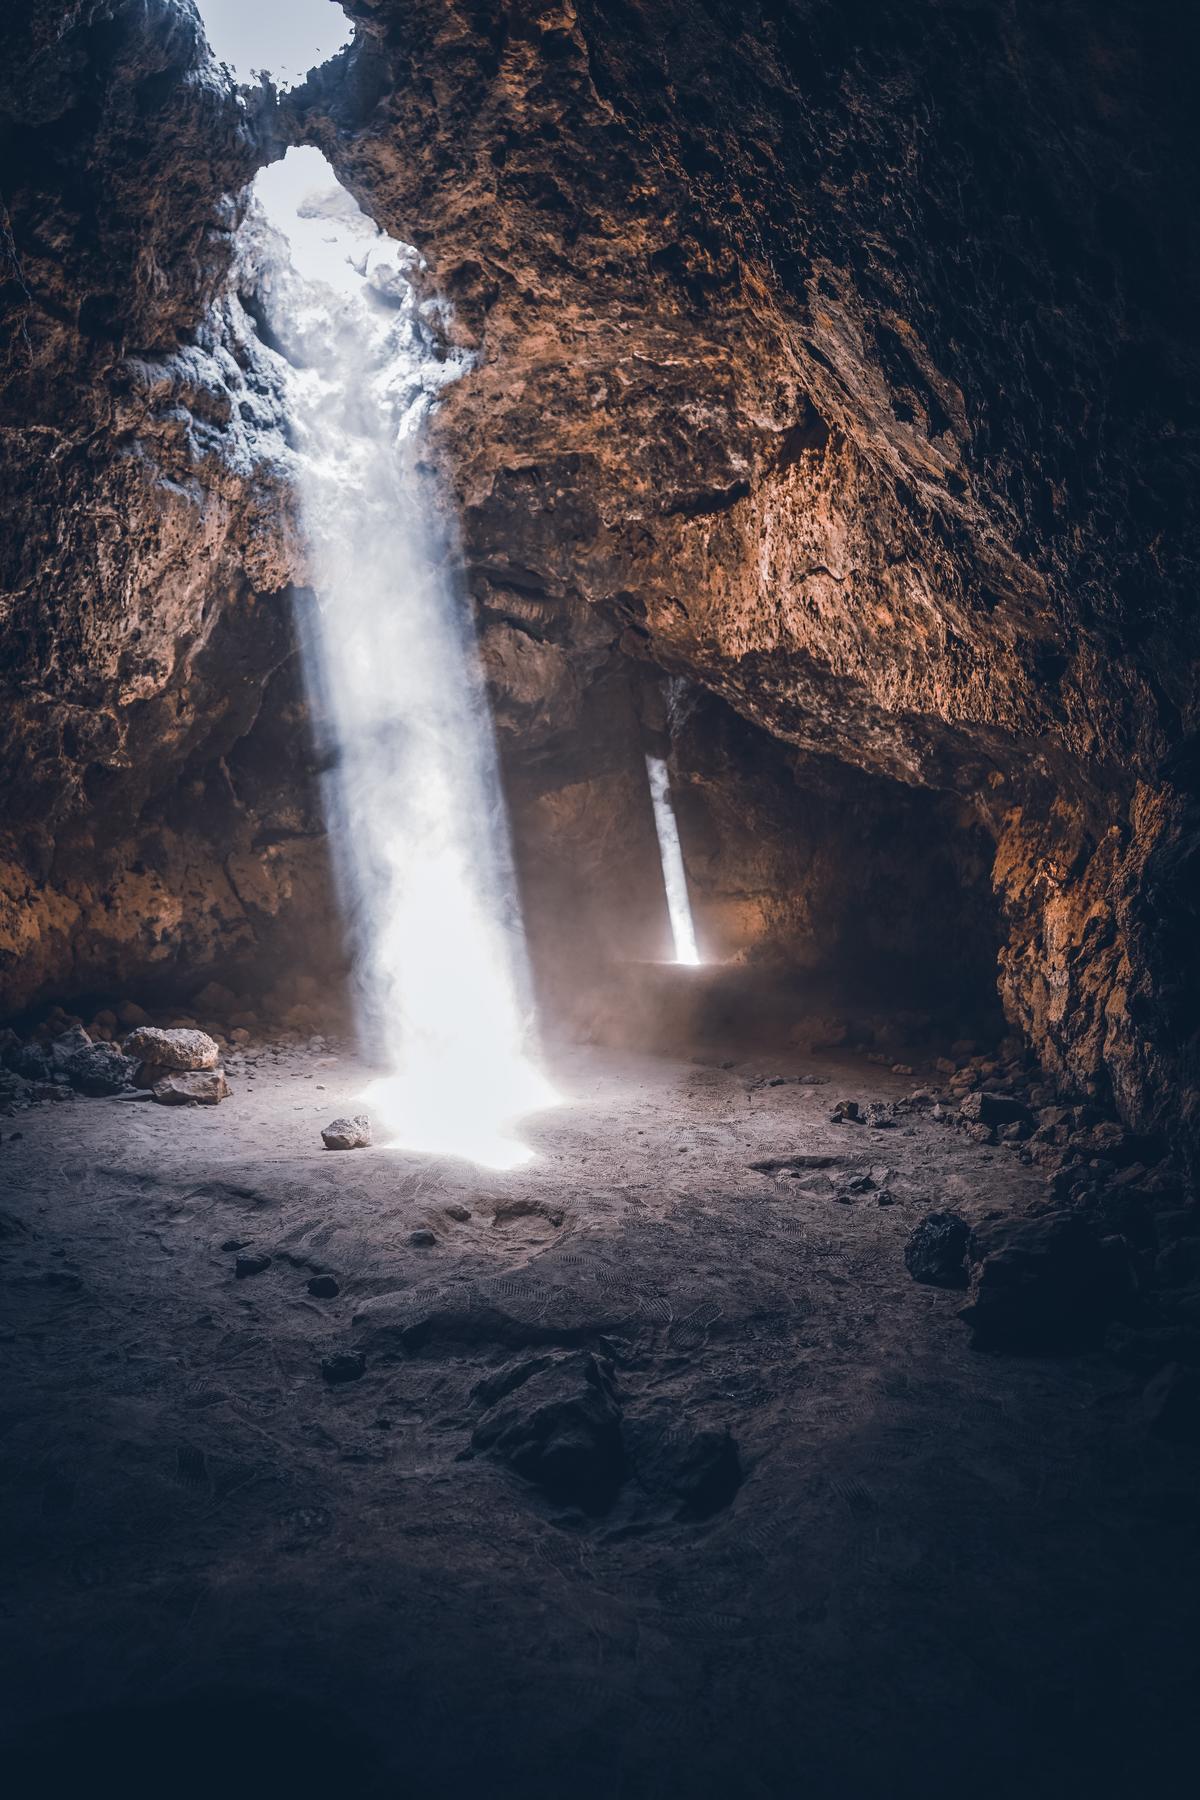 Light shining through holes in a cave